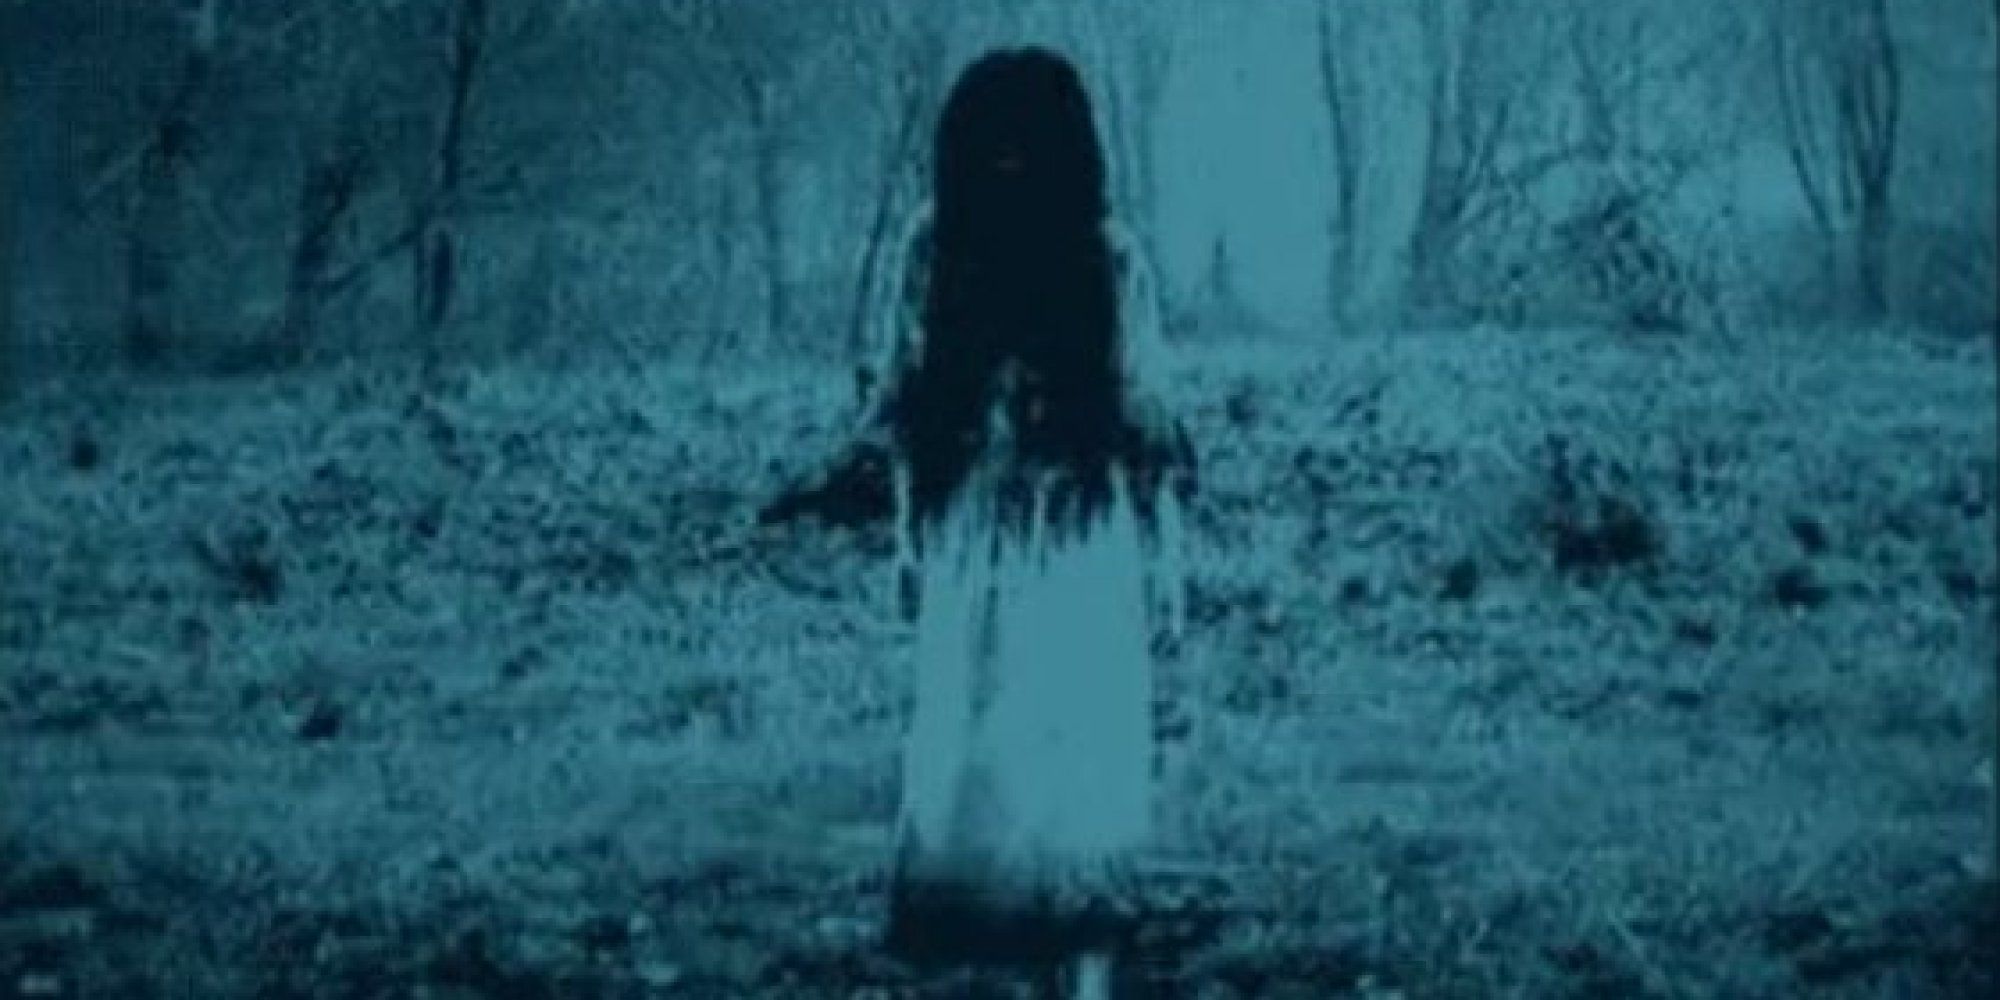 the ring video screensaver